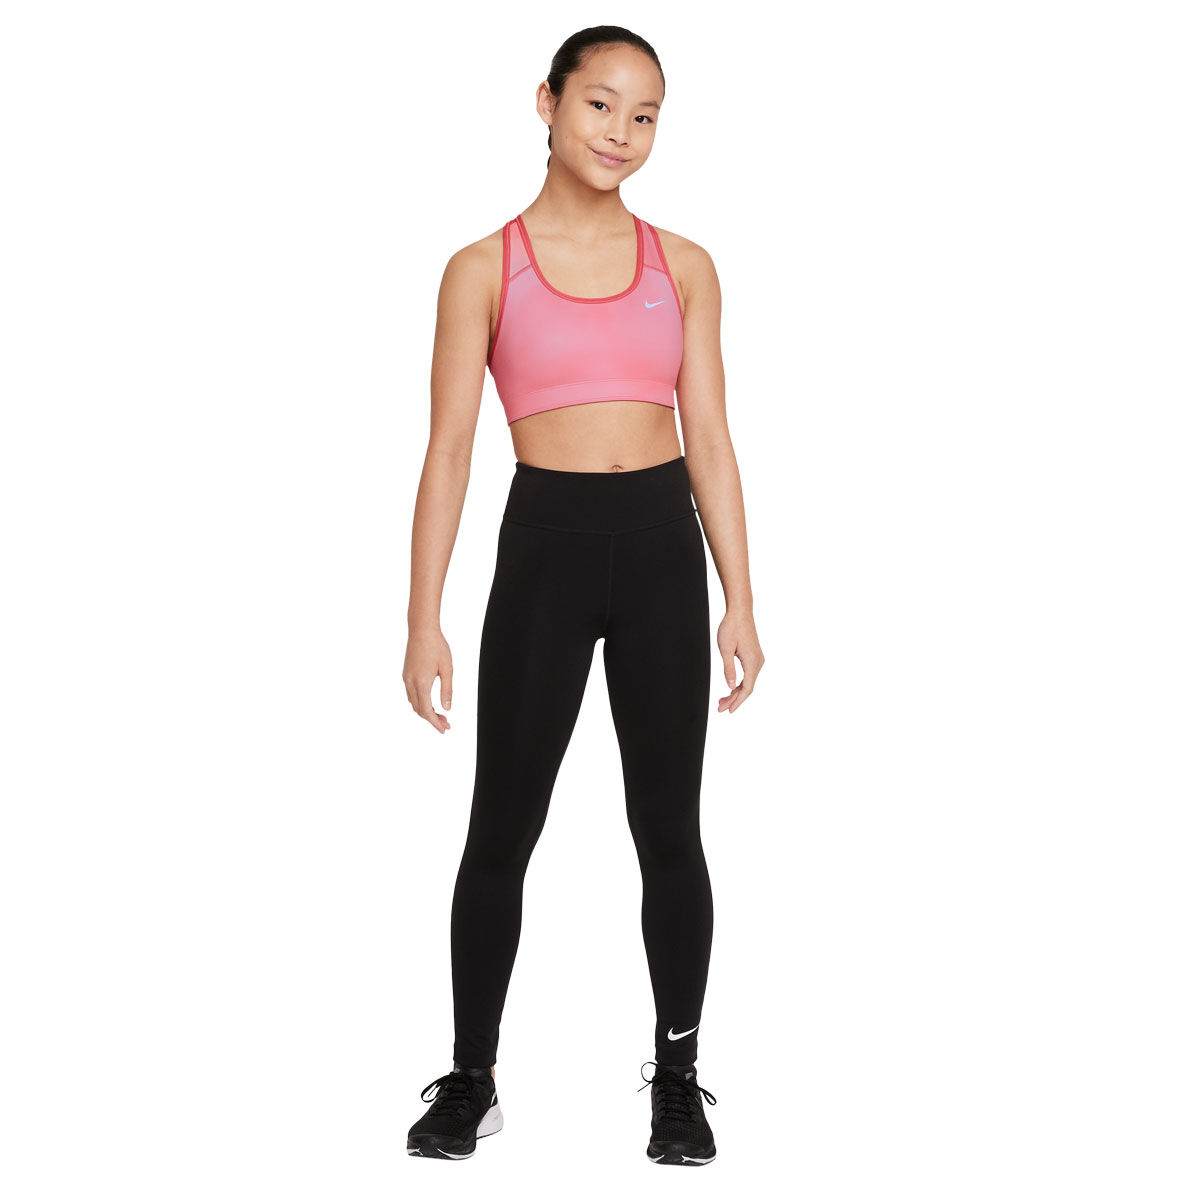 Nike Pro Girl Sports Bra and Leggings Matching Set  Girls sports bras, Sports  bra and leggings, Light wash ripped jeans